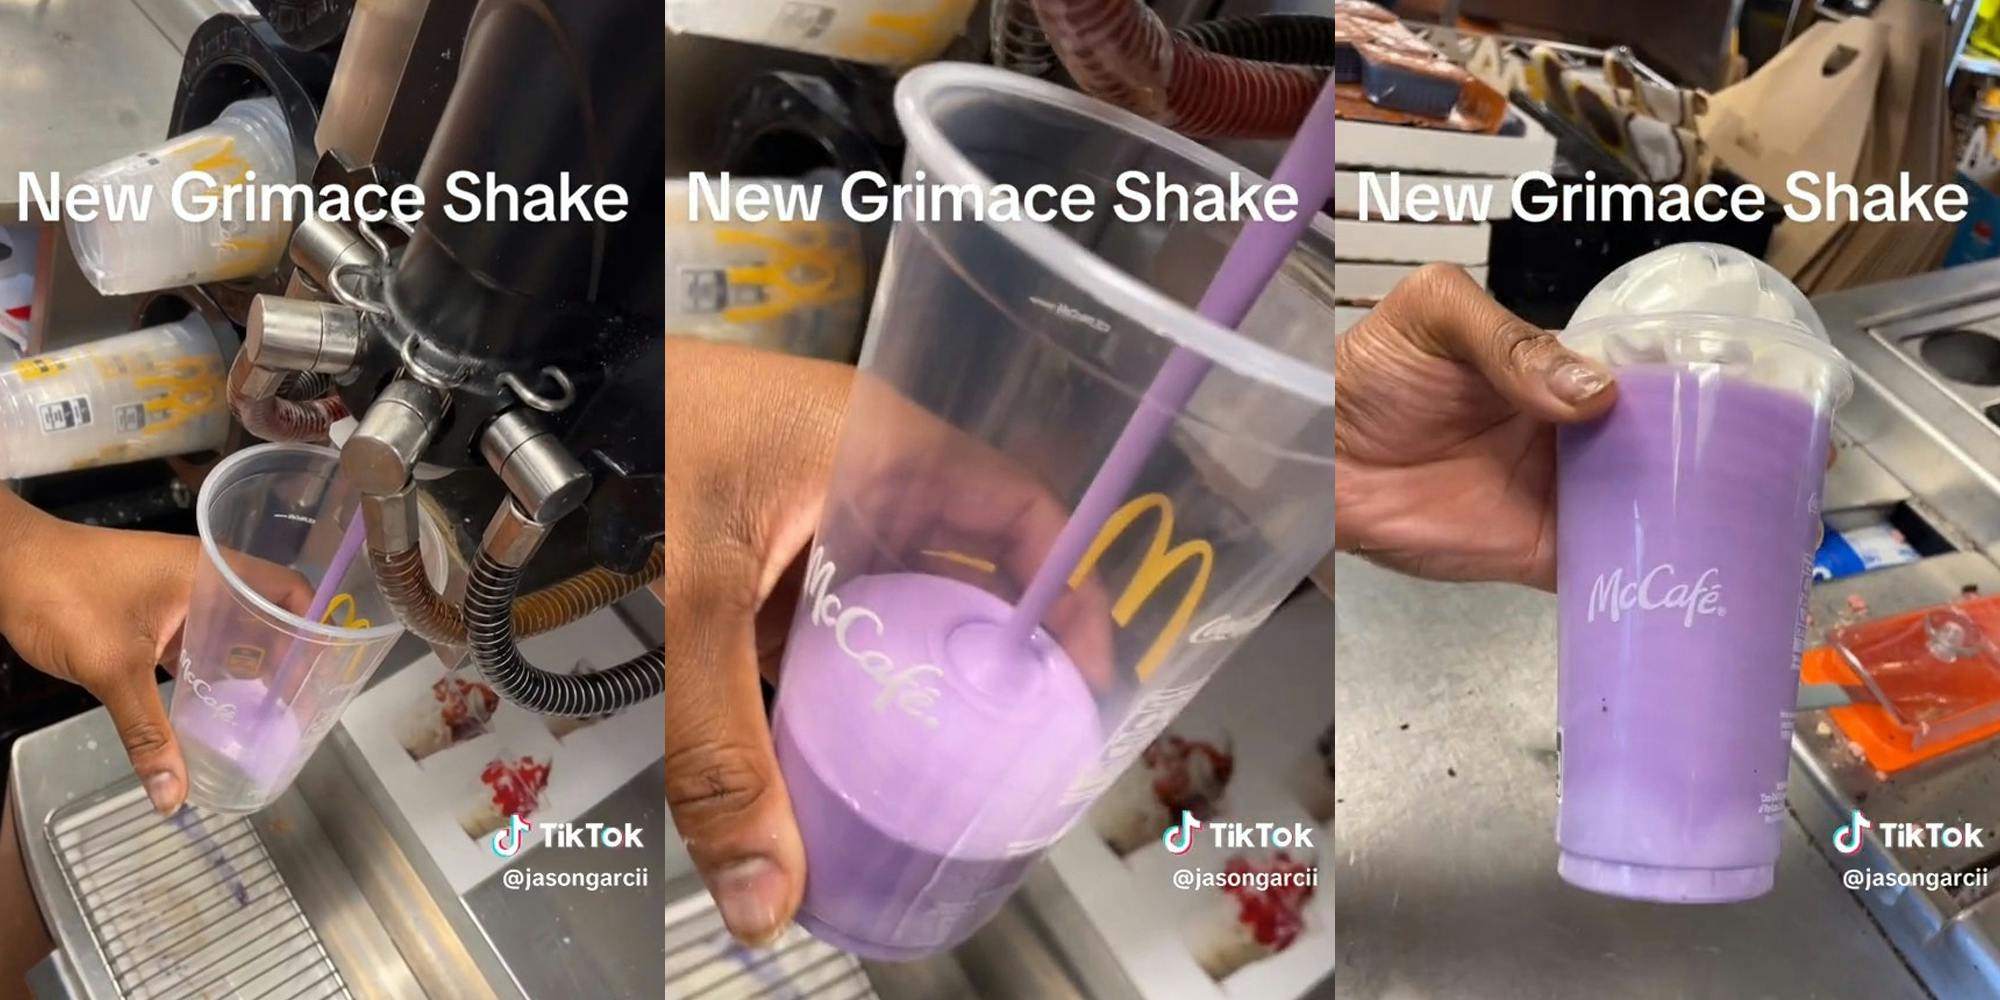 McDonald’s Worker Shows Off New Grimace Shakes